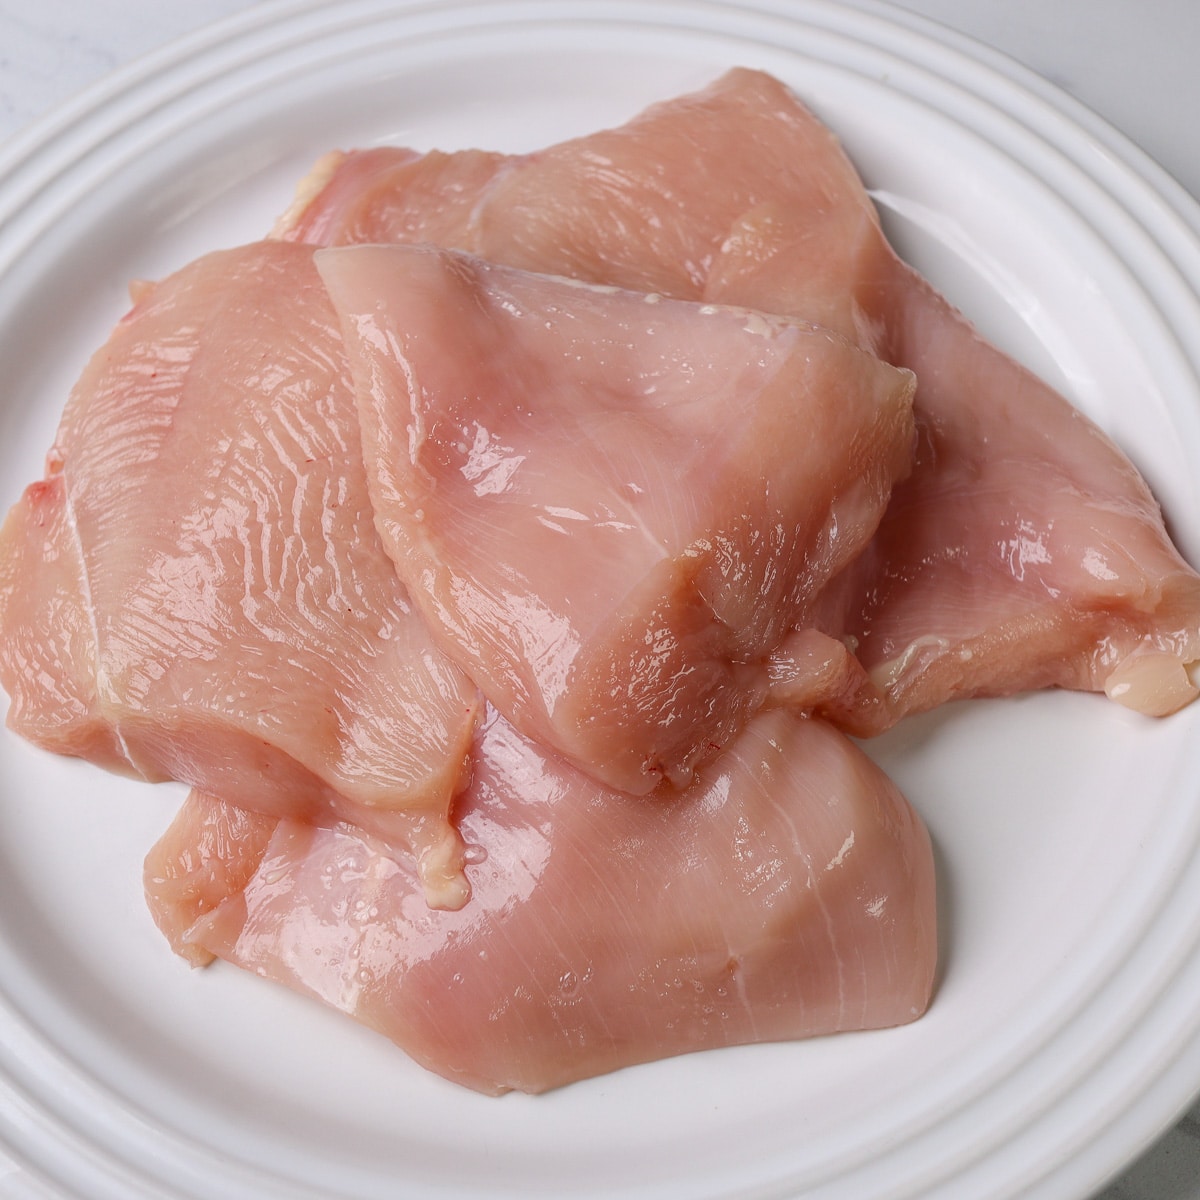 chicken breast sliced in half to make them not as thick
